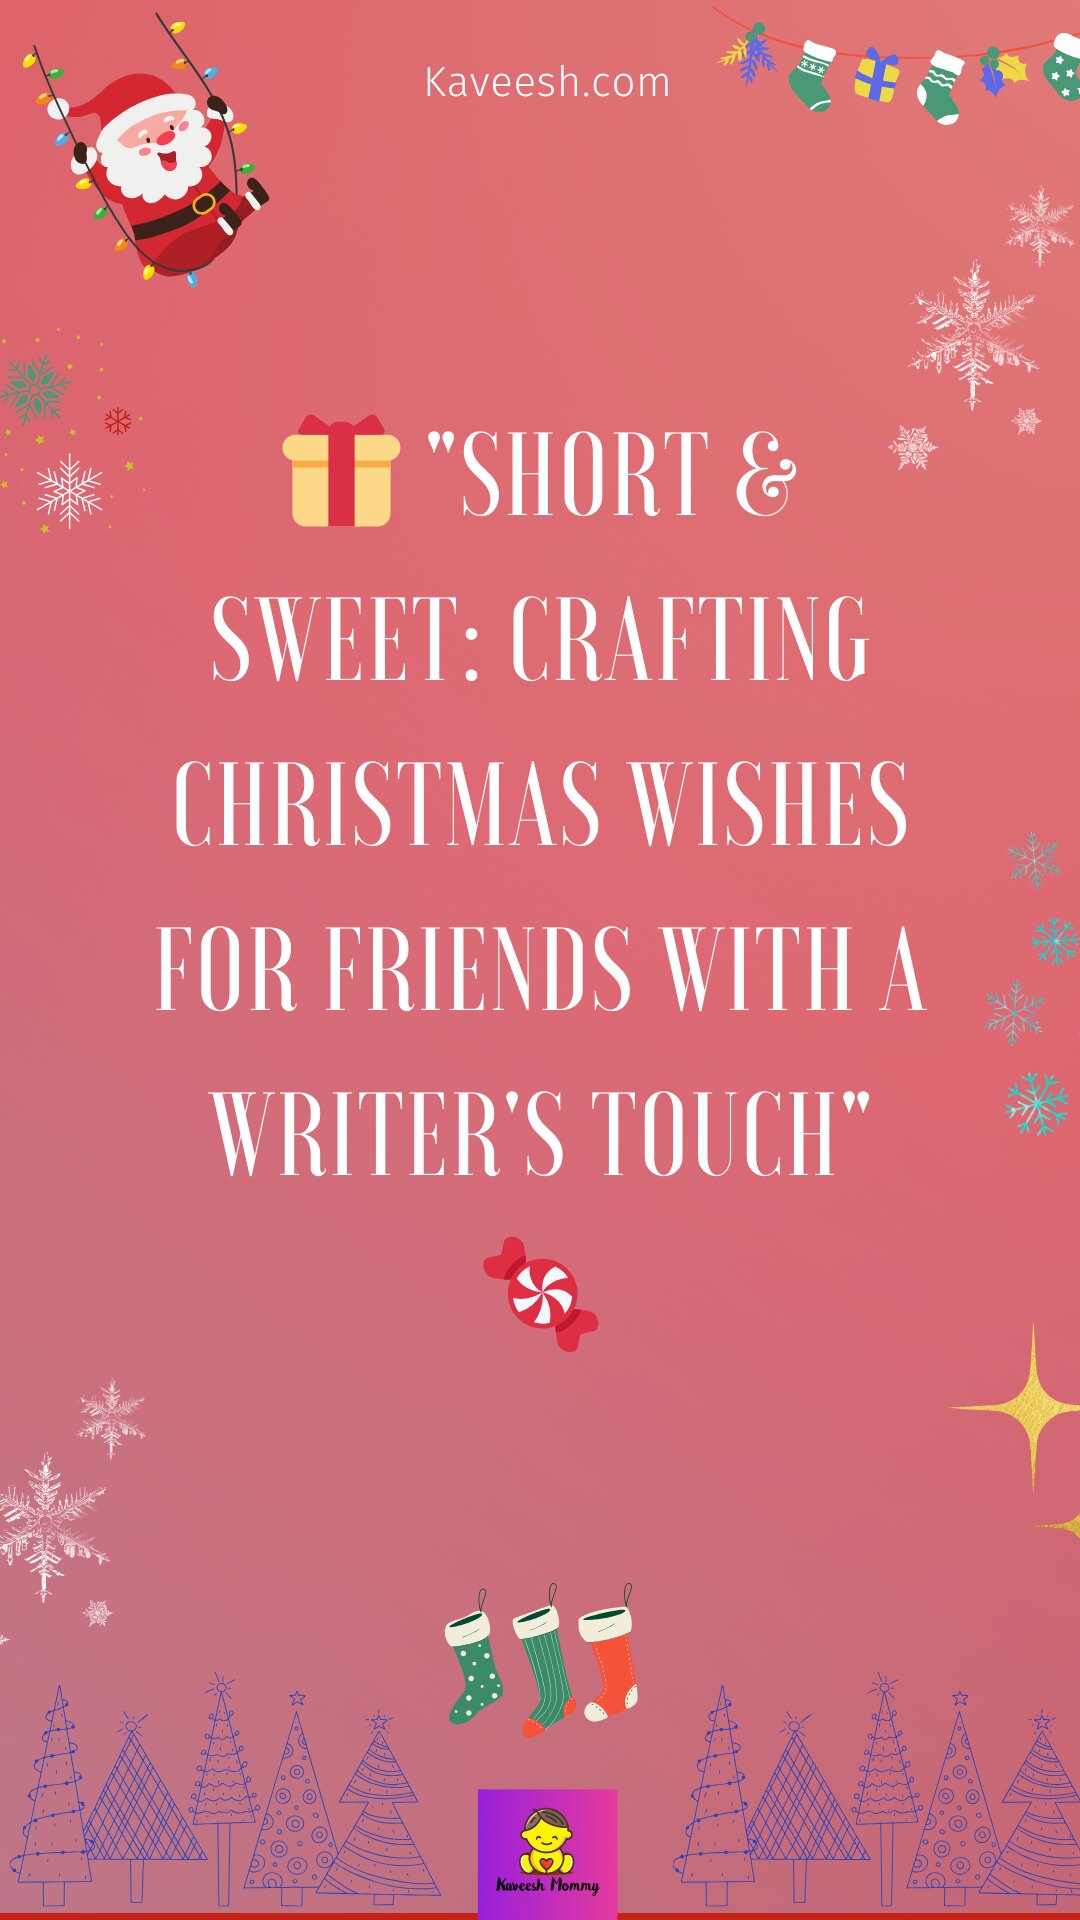 List of short merry Christmas wishes for friends